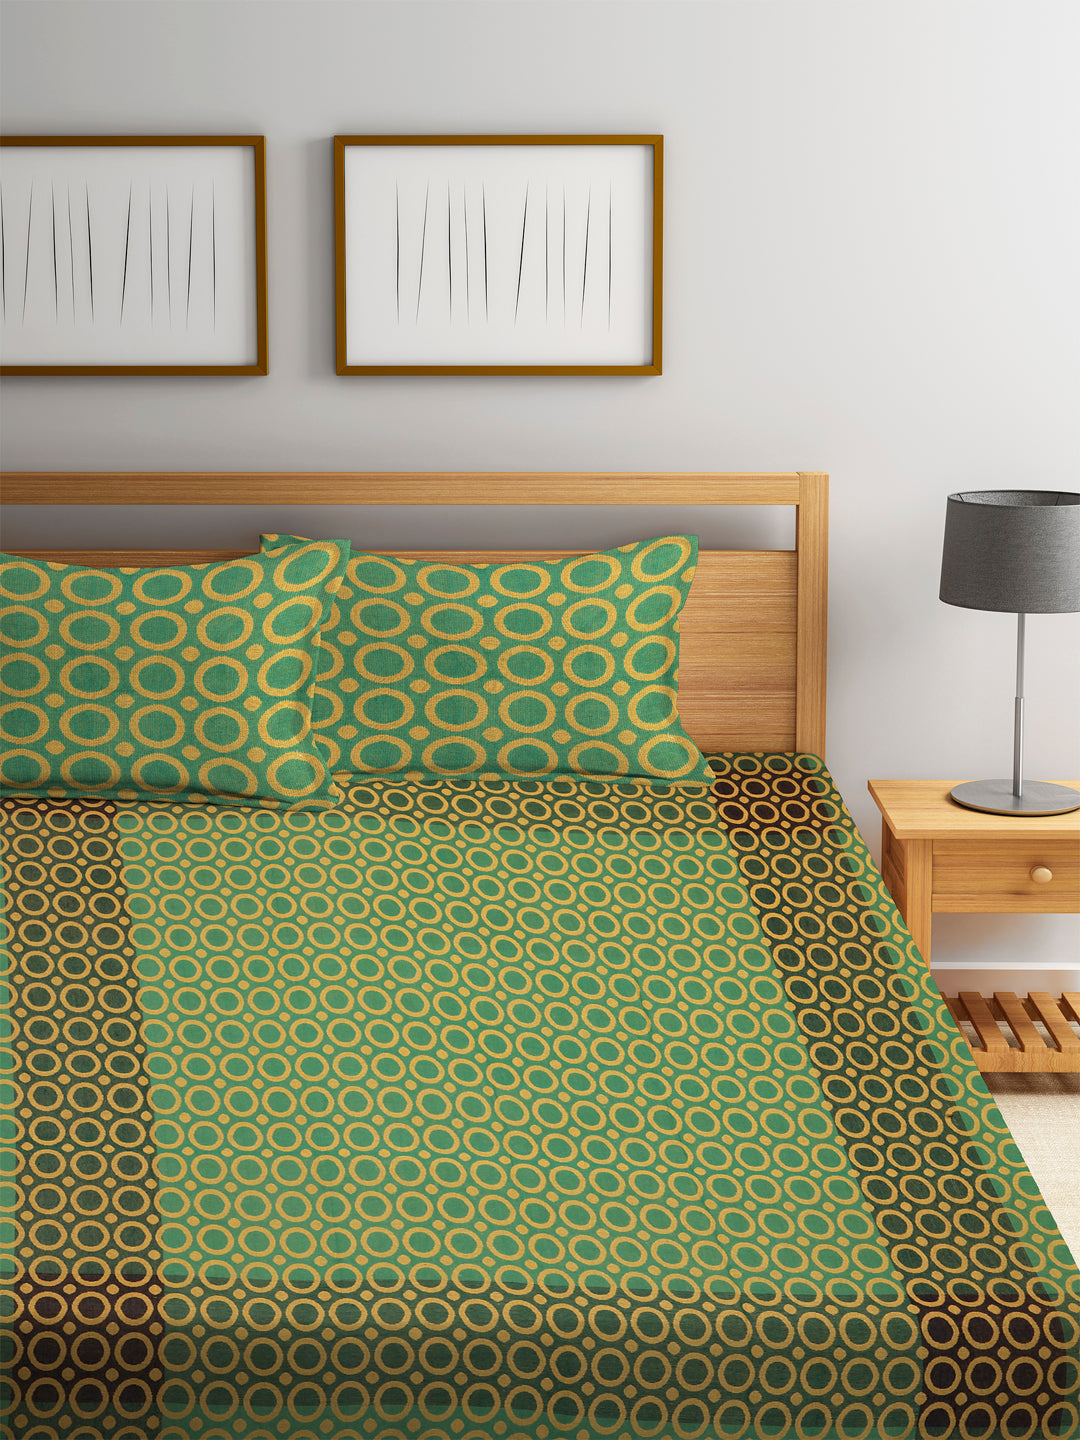 KLOTTHE Green Cotton Woven Design Double King Bed Cover With 2 Pillow Covers (250X225 cm)